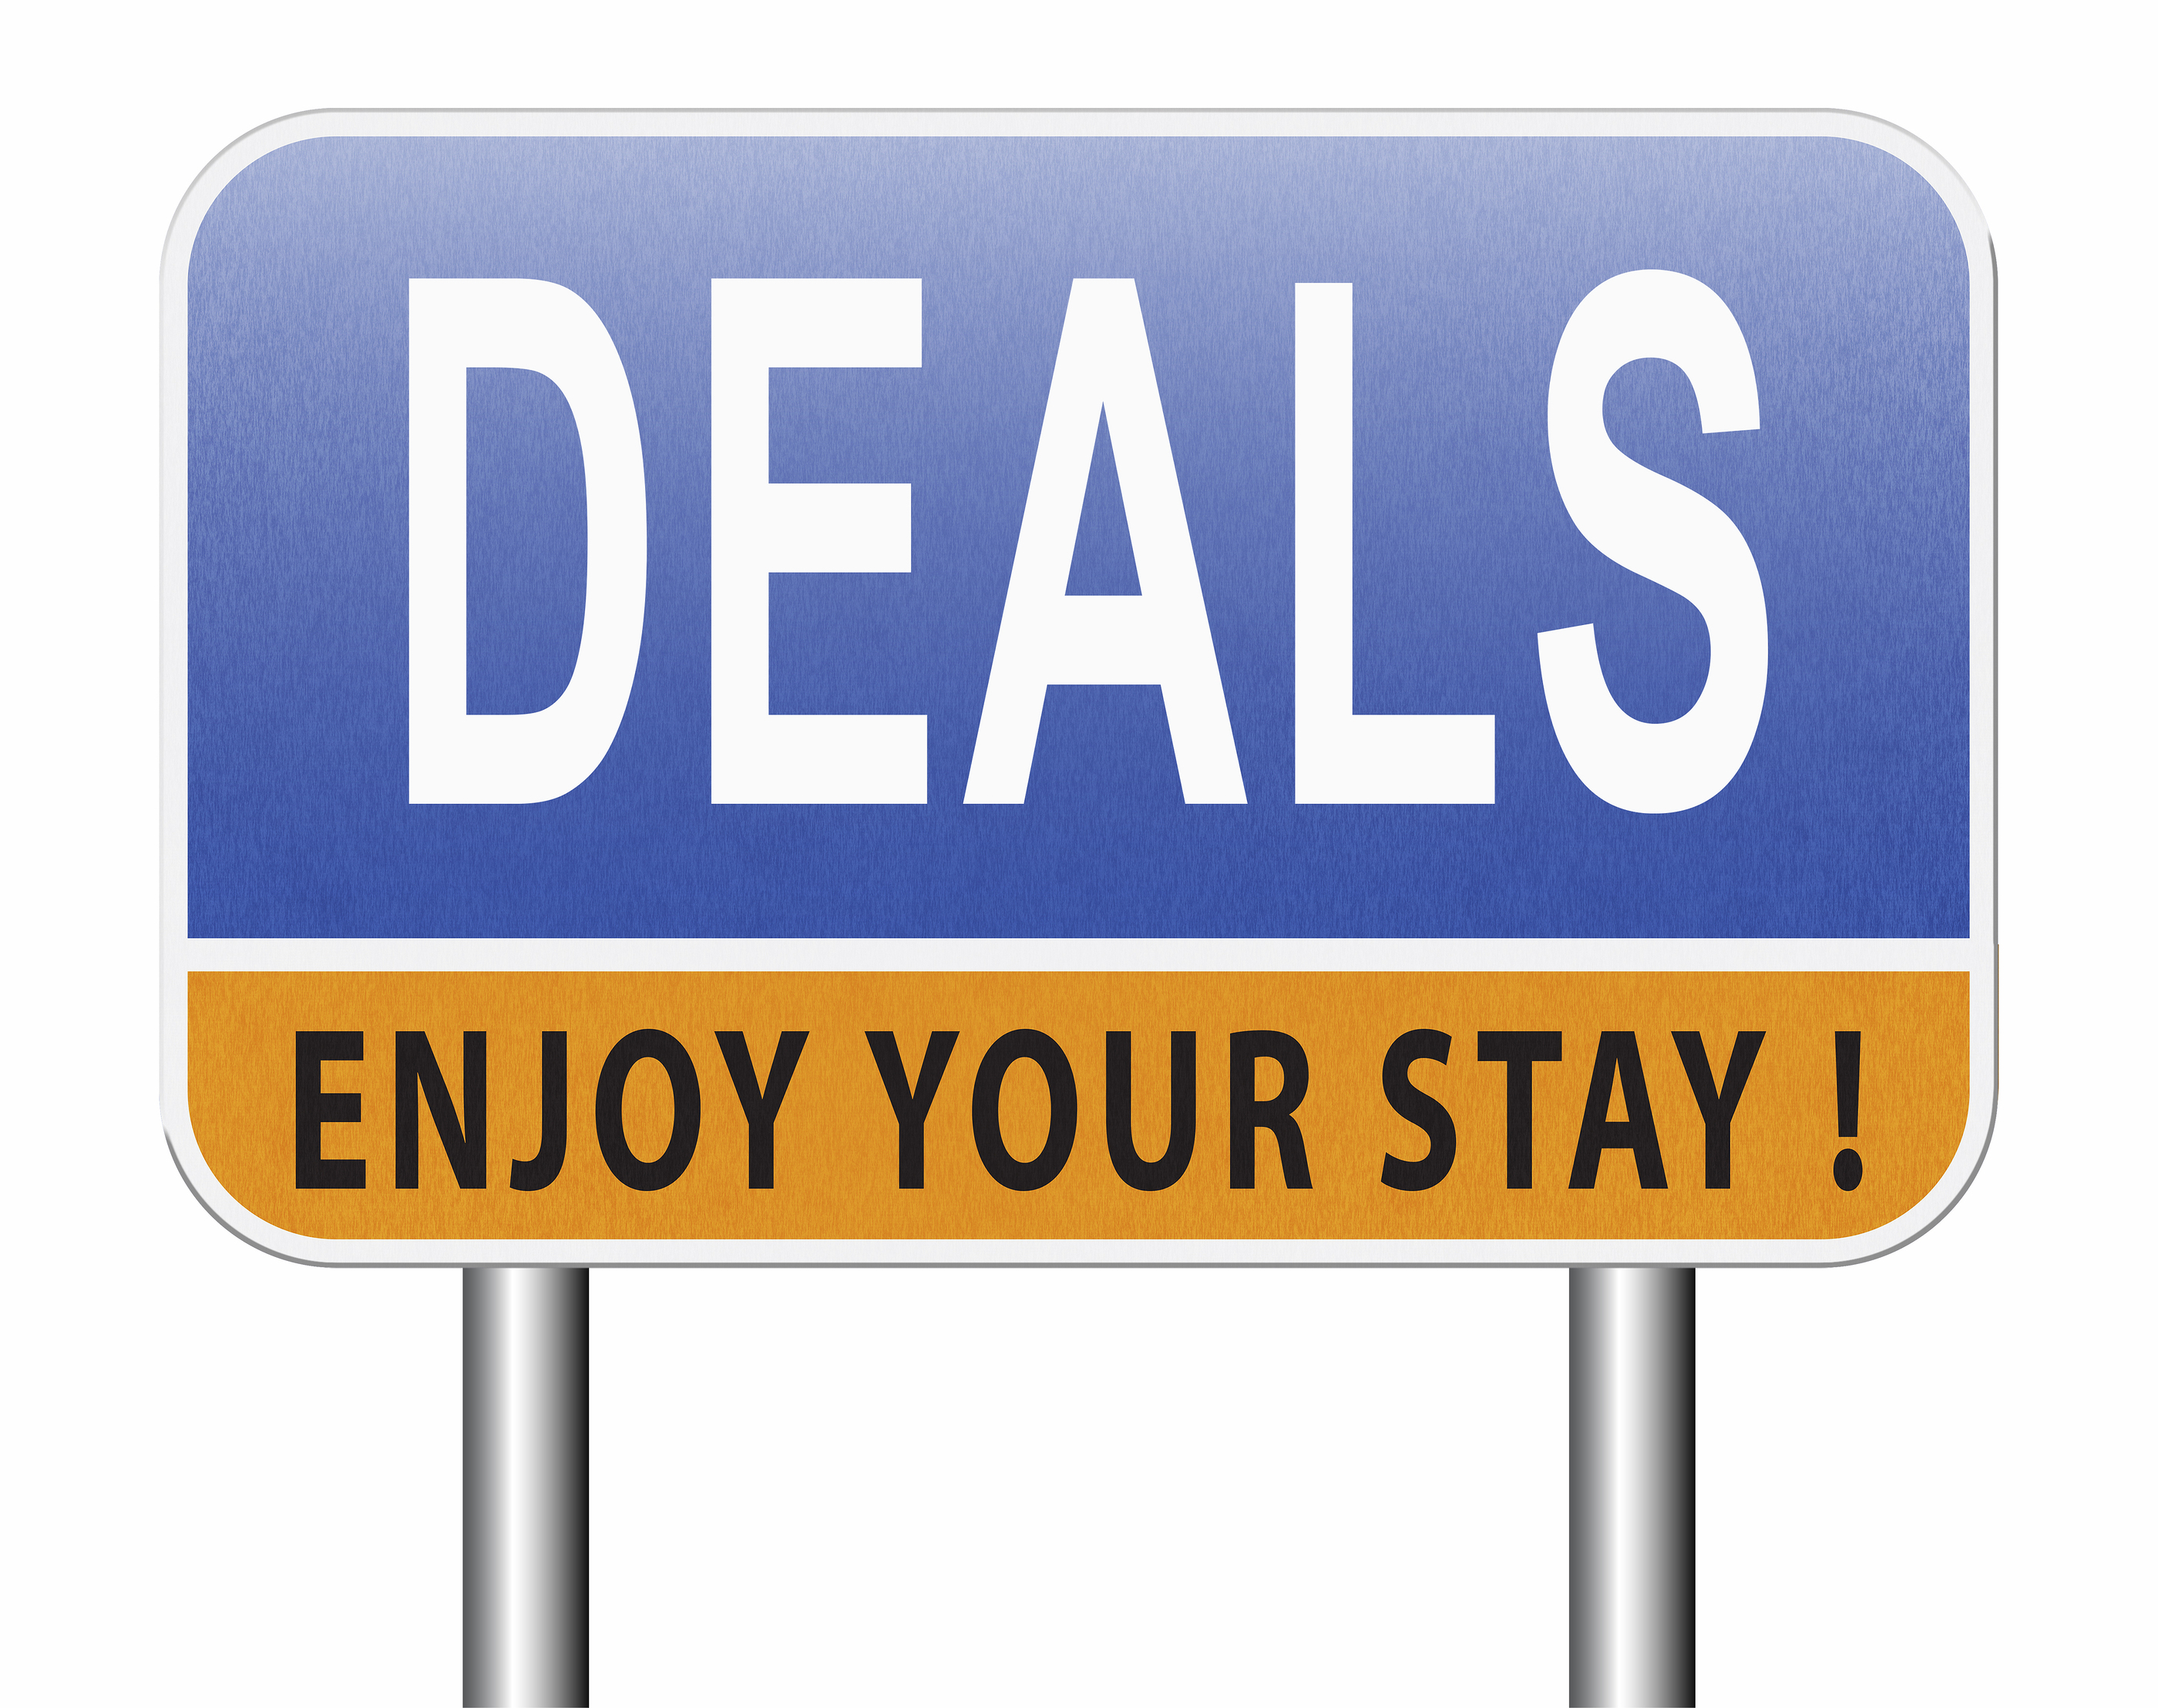 Every Cyber Monday Hotel Deal!